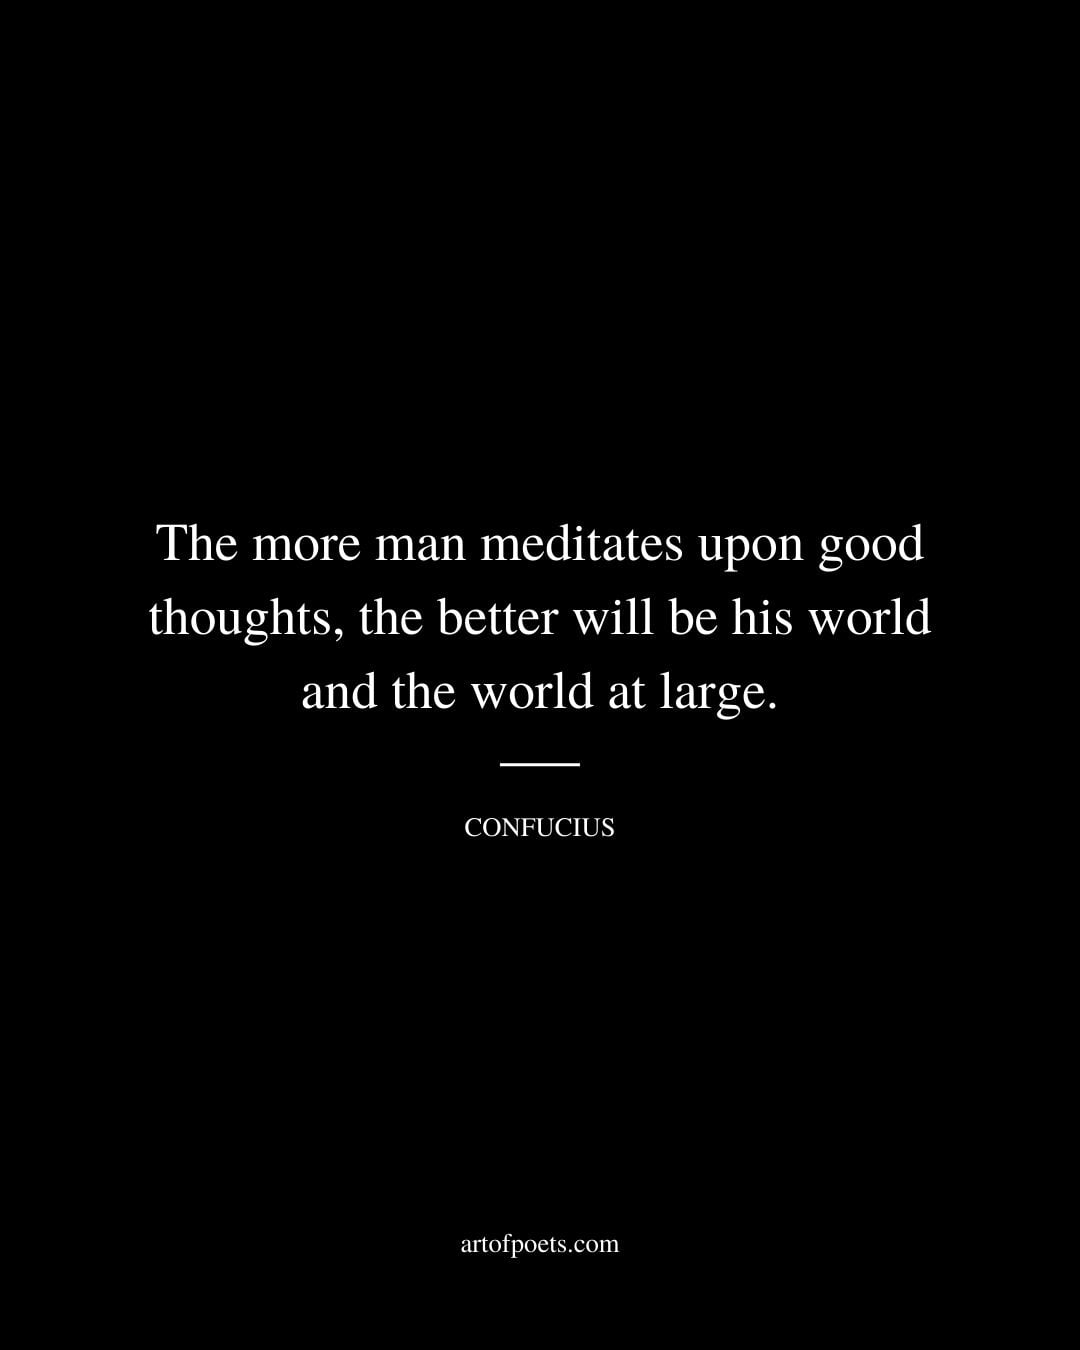 The more man meditates upon good thoughts the better will be his world and the world at large